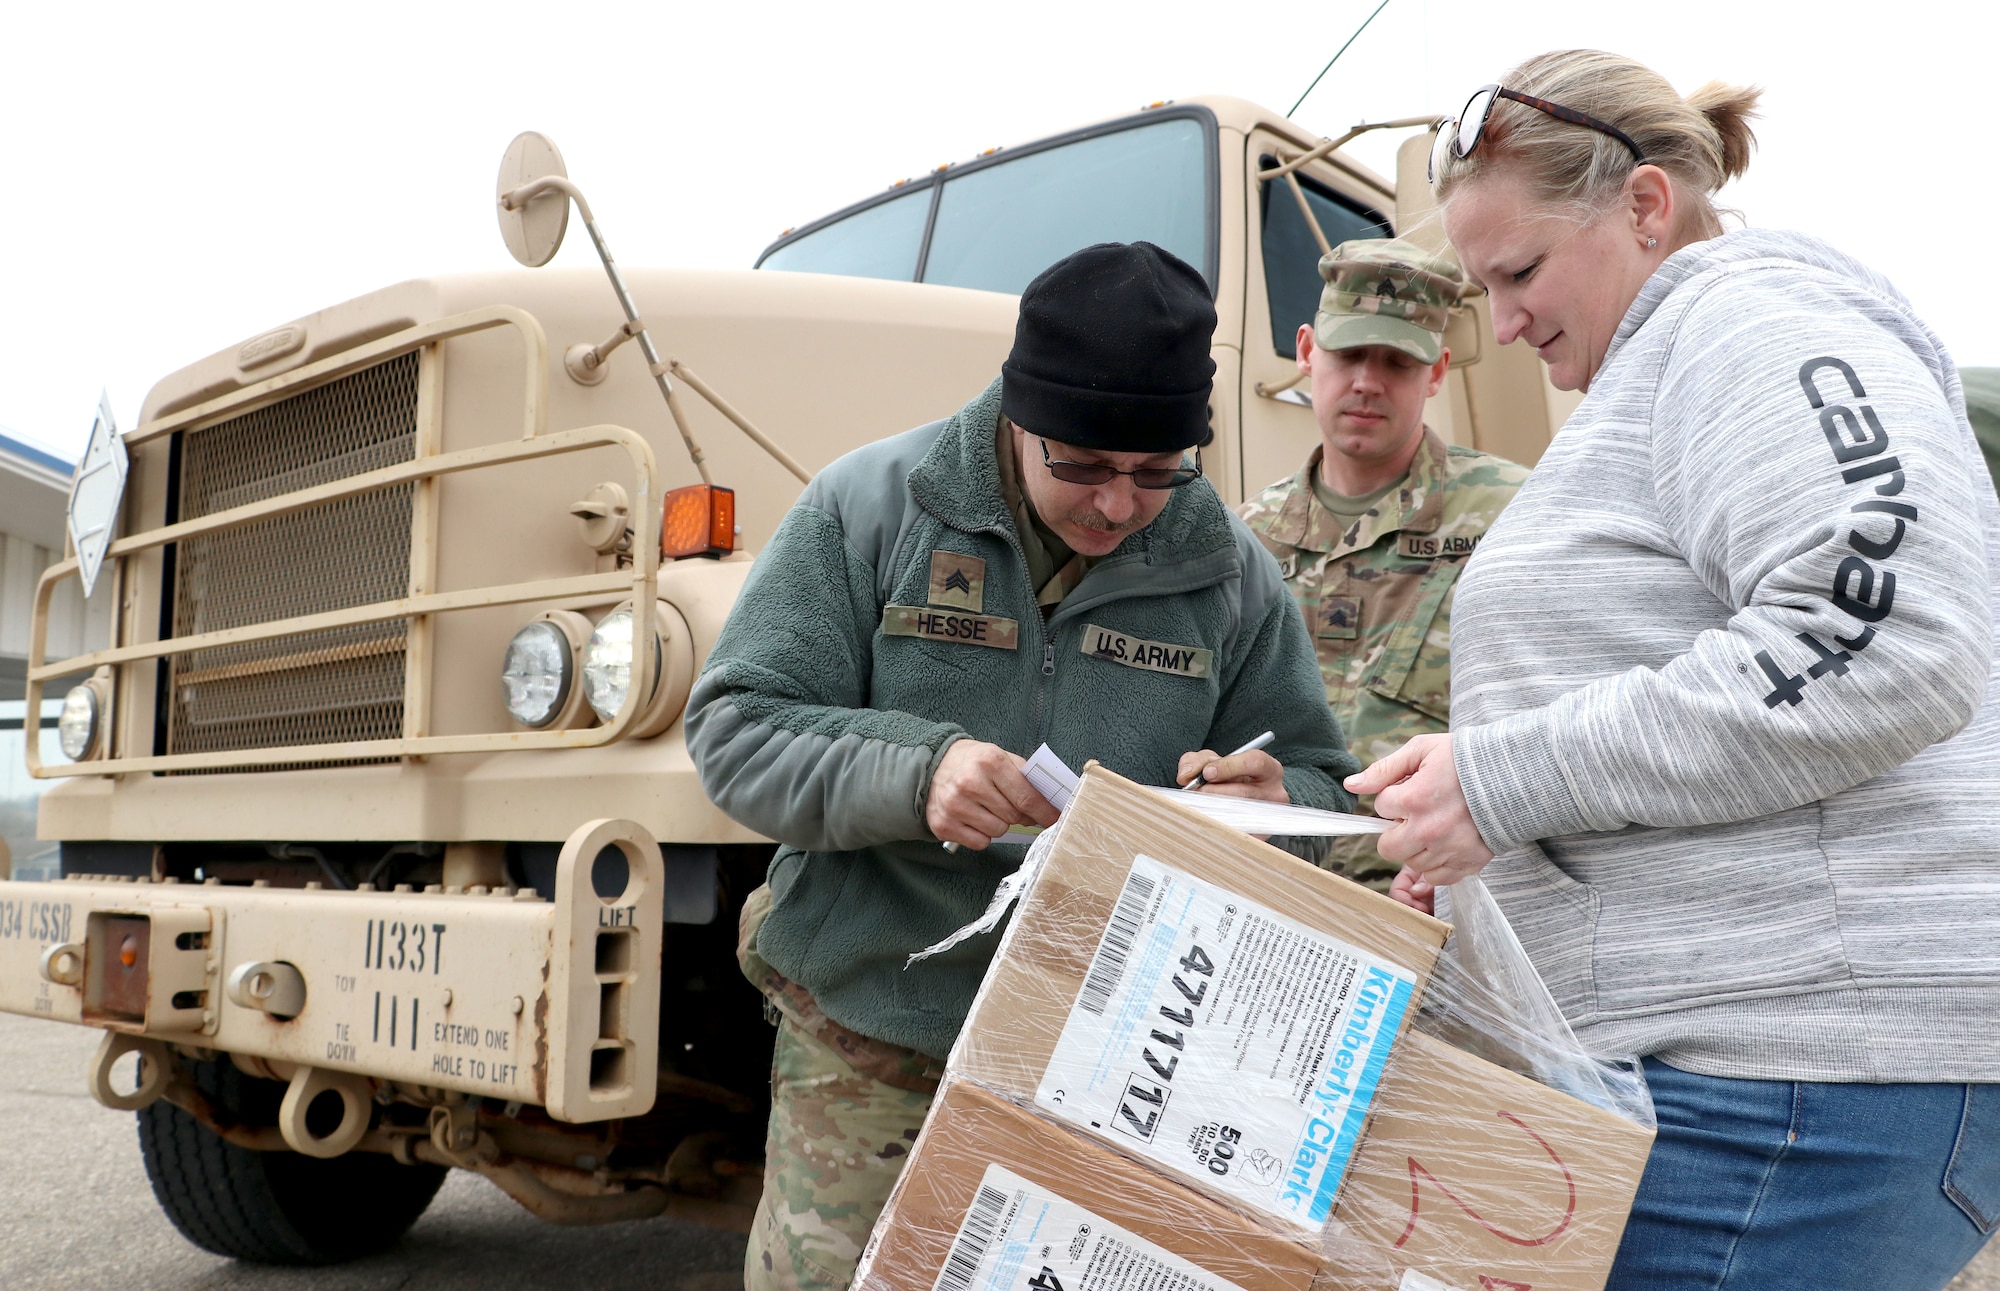 Sgt. Timothy Hesse Sr. and Sgt. Zachary Anderson, motor transport operators with the 1133rd Transportation Company, Iowa Army National Guard, deliver essential medical supplies in Iowa